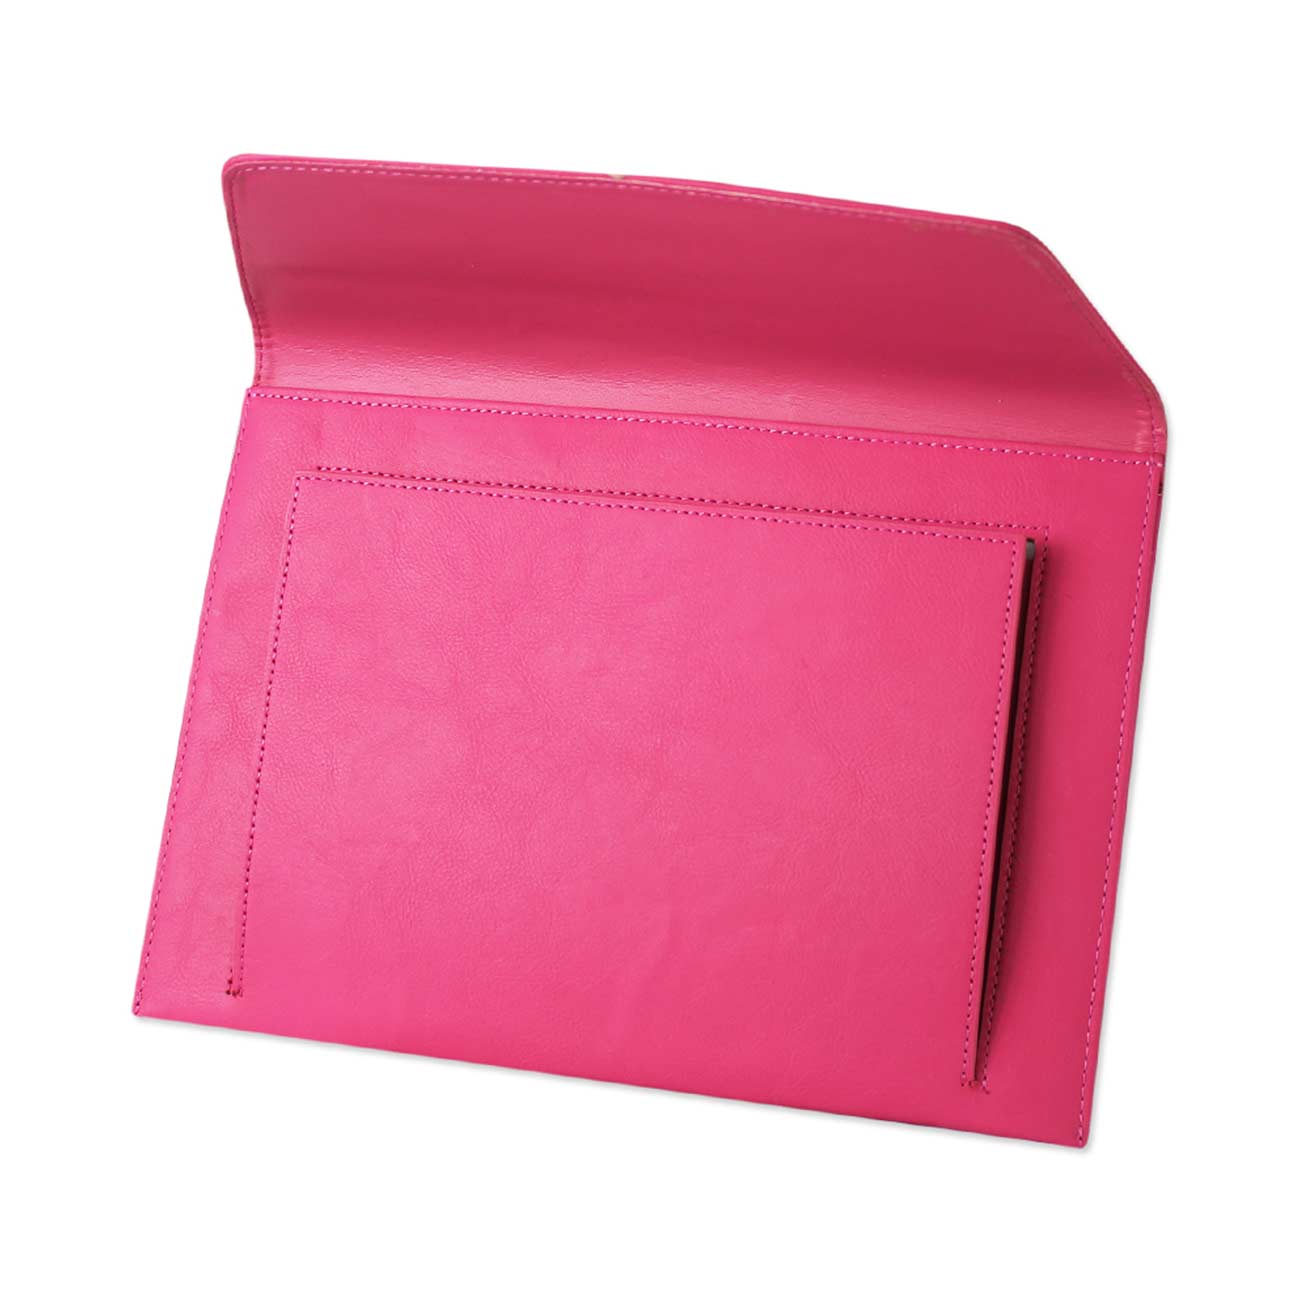 REIKO PREMIUM LEATHER CASE POUCH FOR 8.2INCHES IPADS AND TABLETS In HOT PINK